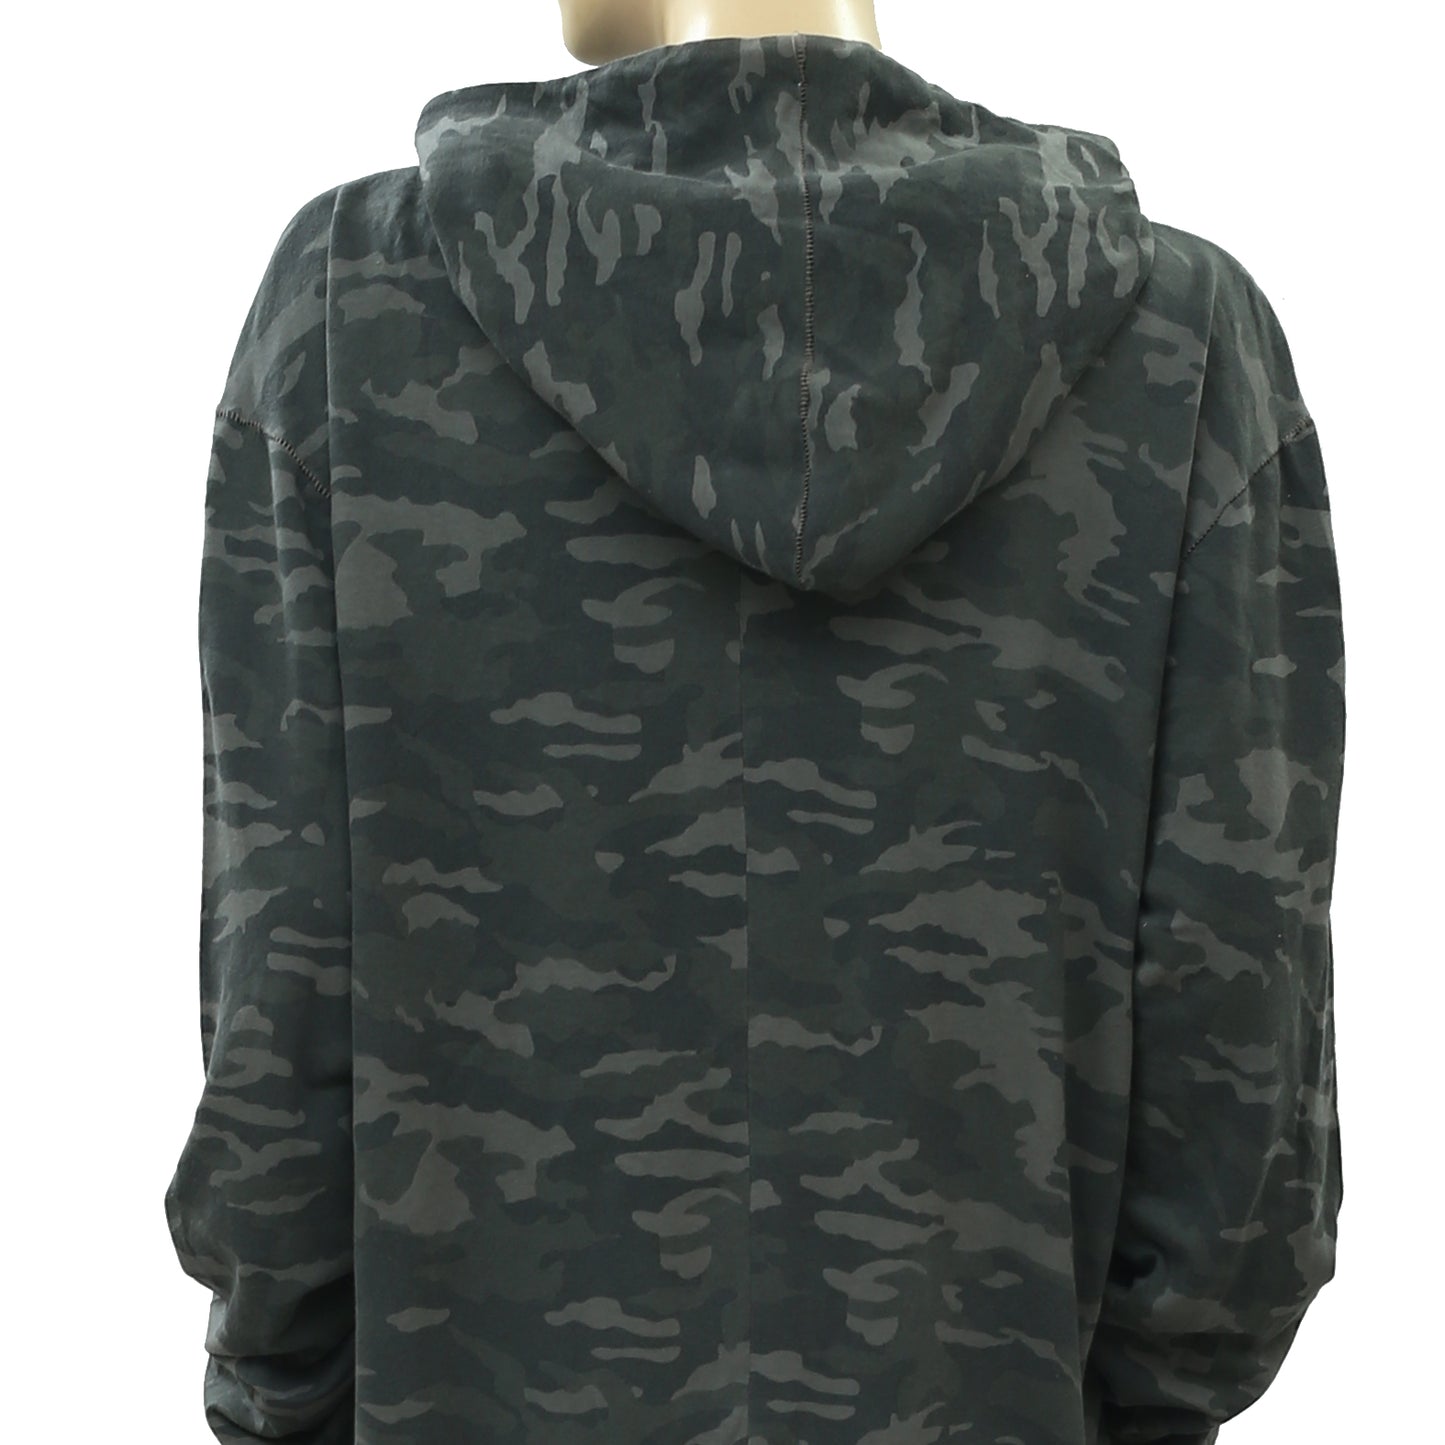 Urban Outfitters Military Printed Hoodie Top